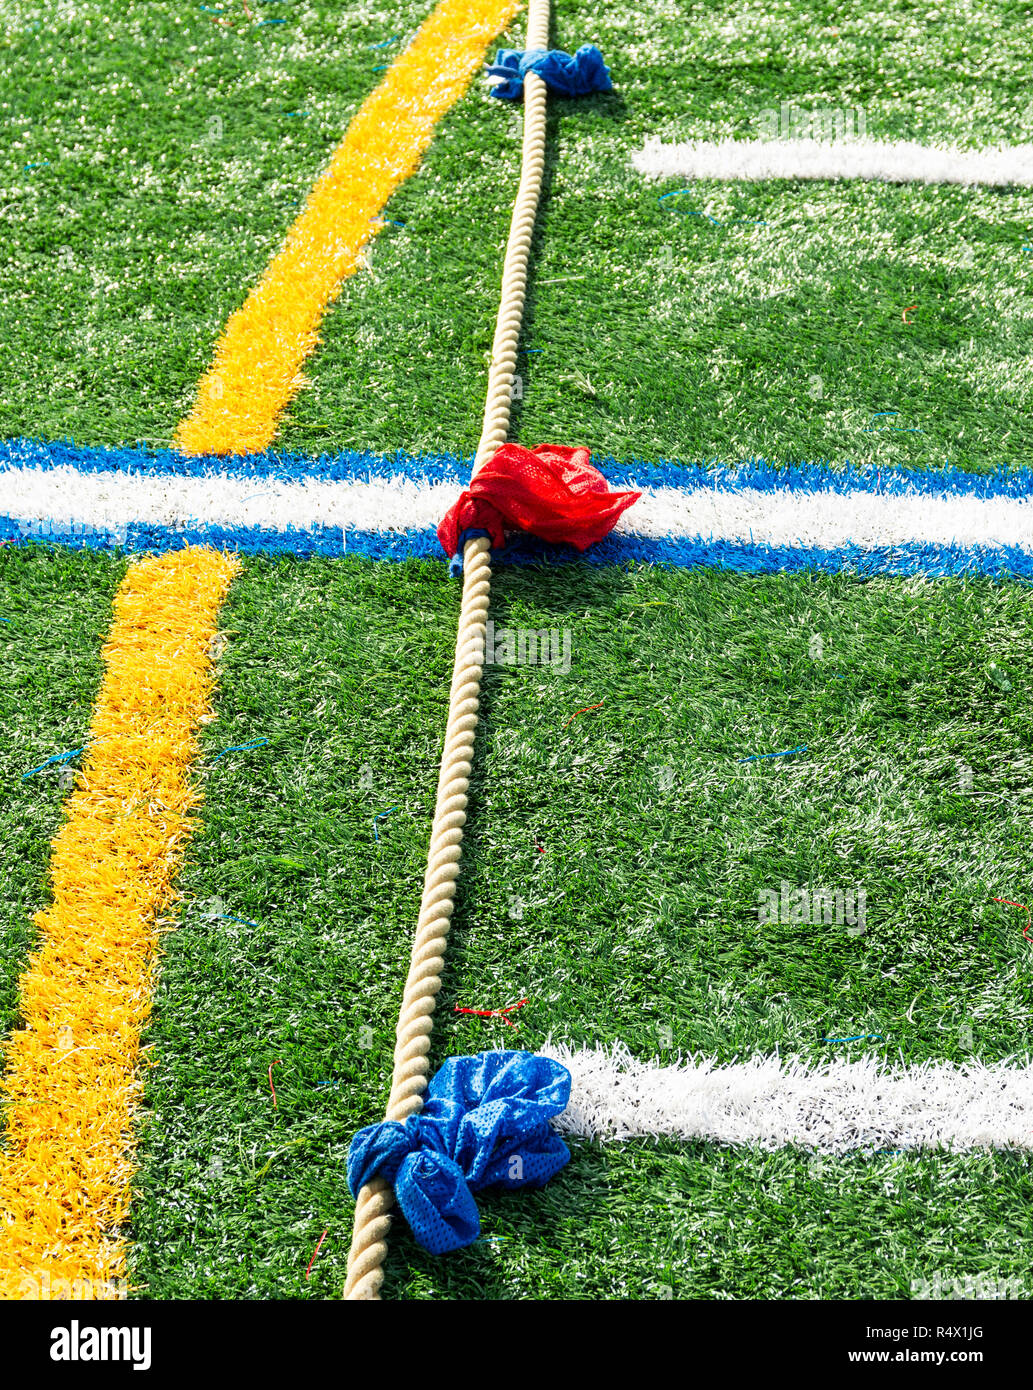 A tug of war rope with blue and red markers on it lying on a green